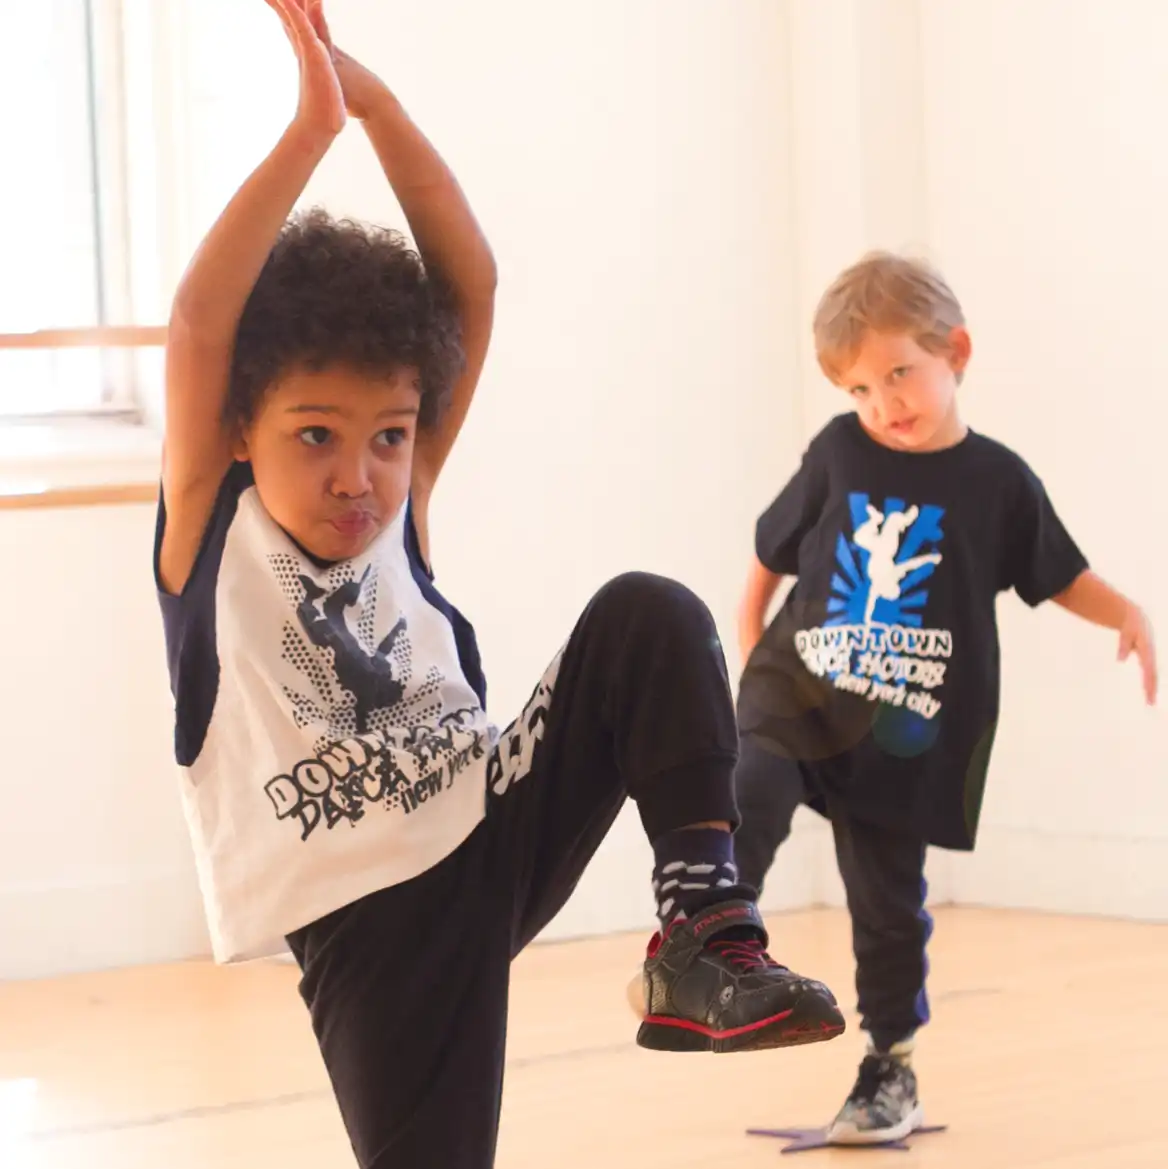 Break dancing lessons for kids in Tribeca, New York at the award winning Downtown Dance Factory